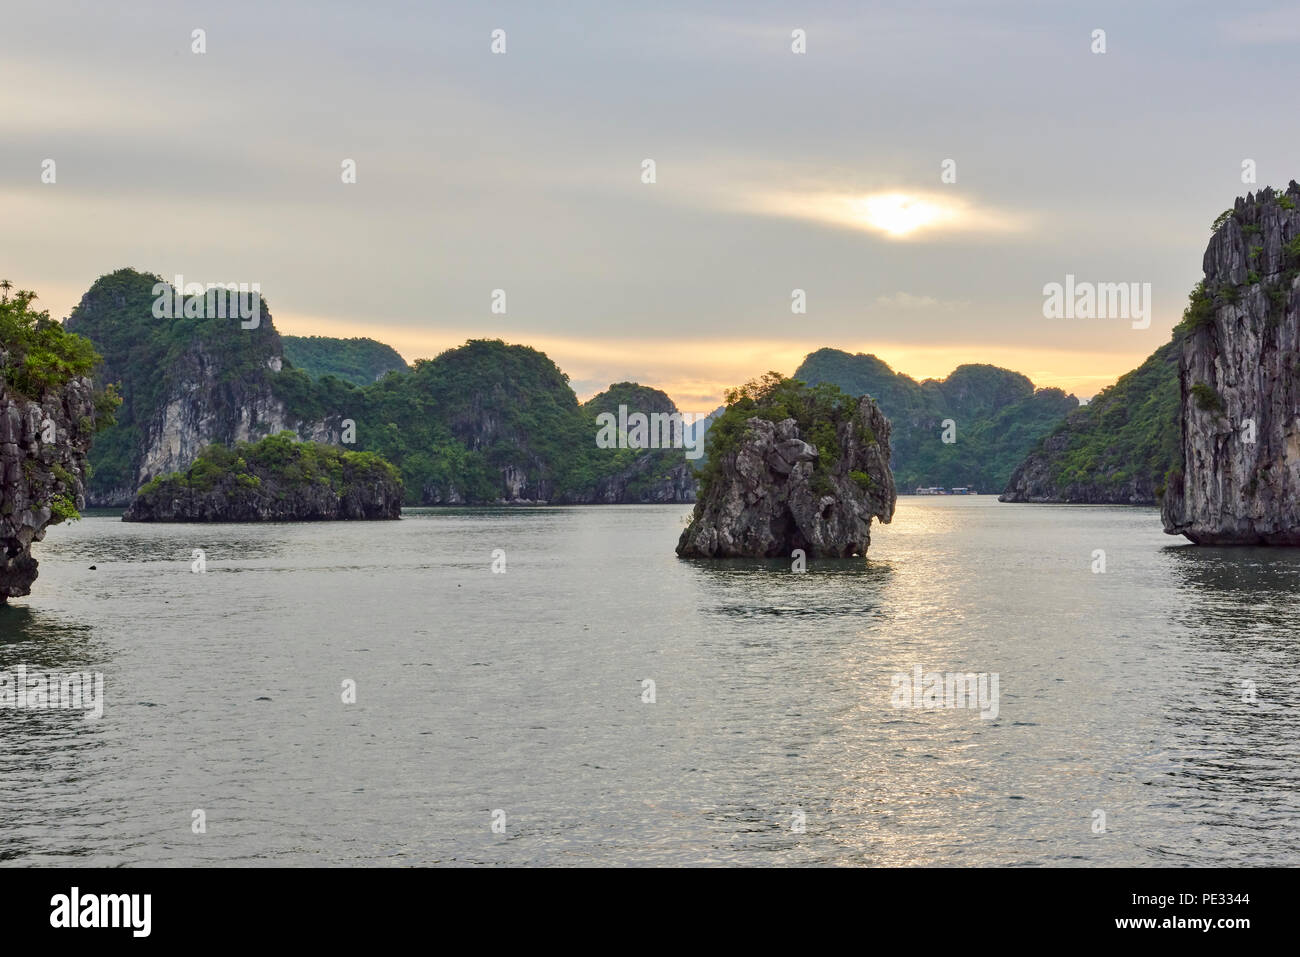 Sunset in Halong Bay, North Vietnam, with sun peaking through overcast sky and rocky islets in the mid ground. Stock Photo